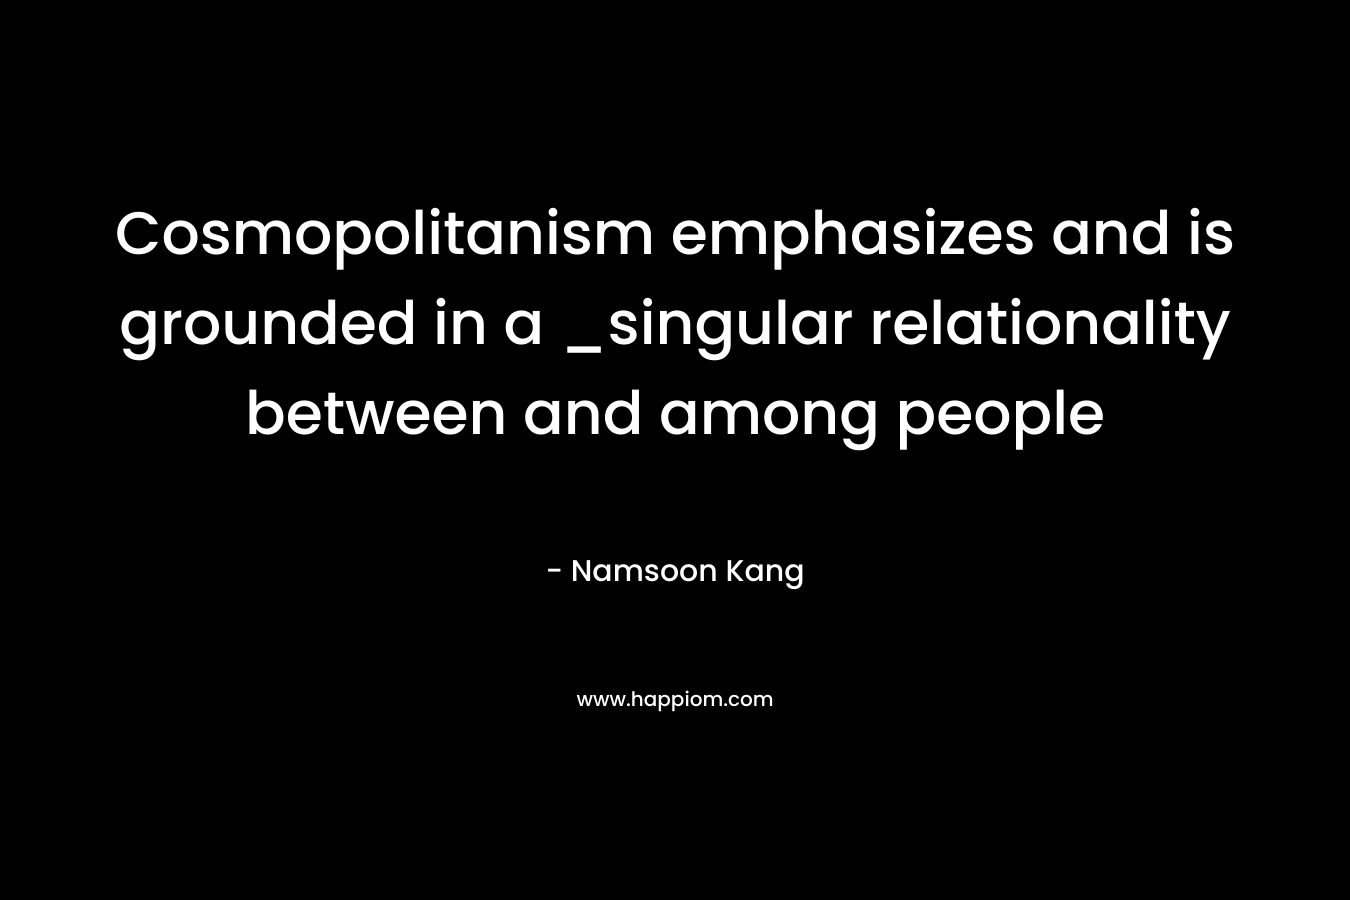 Cosmopolitanism emphasizes and is grounded in a _singular relationality between and among people